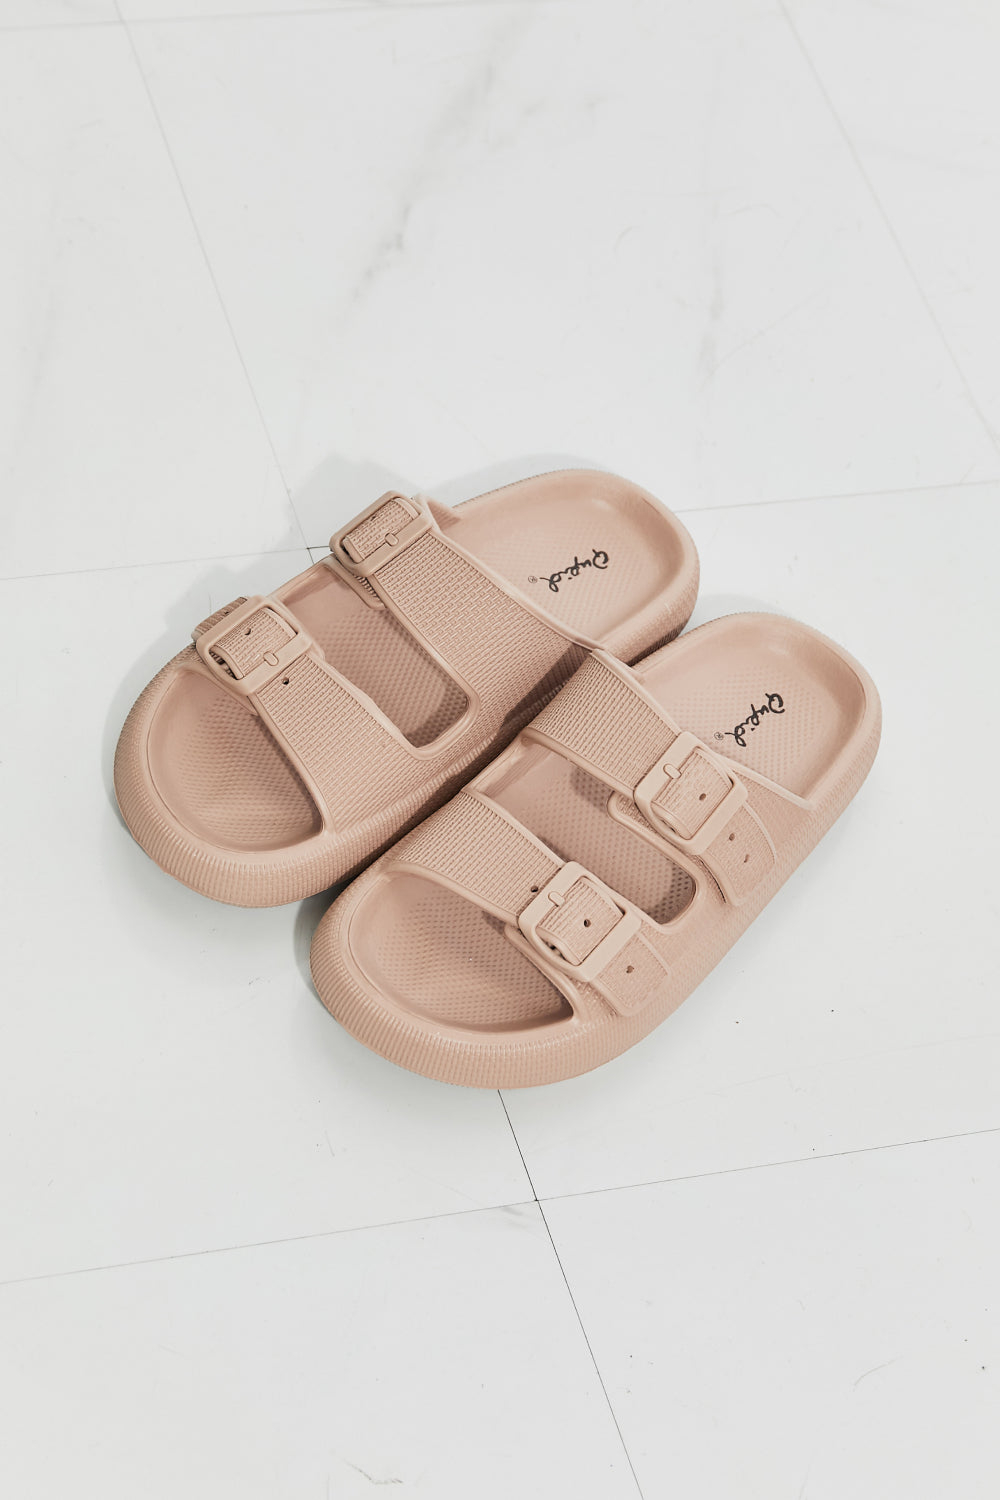 Qupid Comfy Casual Rubber Slide Sandal in Dust Storm